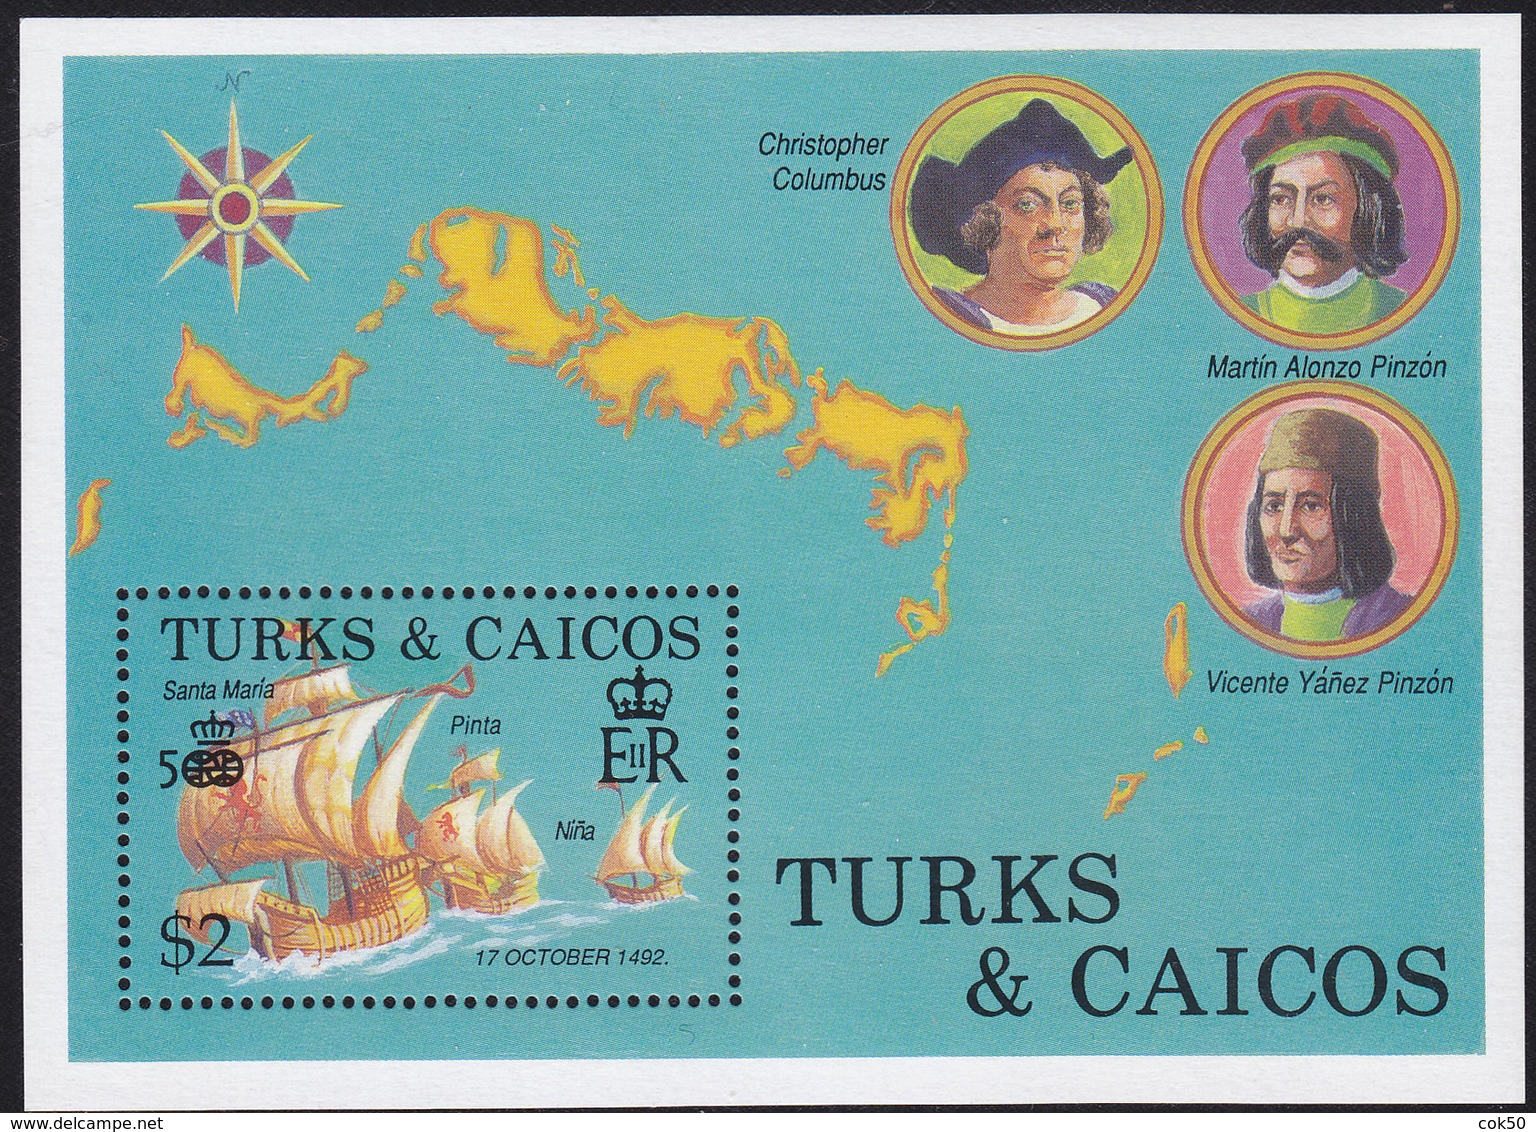 TURKS AND CAICOS 1992, Anniv. Coins For The 500th Year Jub. For Discovery Of America MNH, Mi# Bl.118 - Turks And Caicos